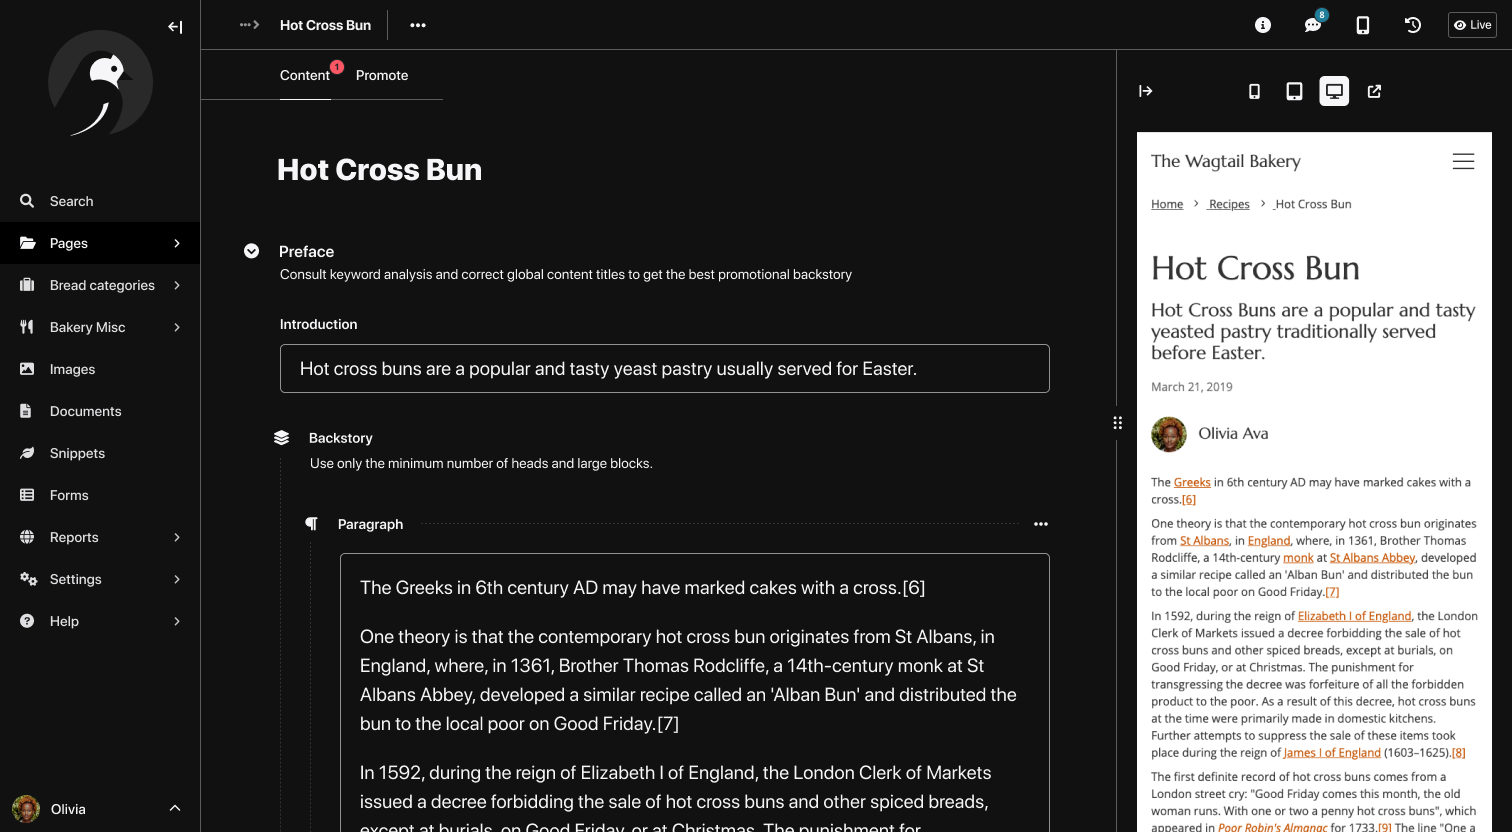 Wagtail dark theme prototype, in high contrast mode